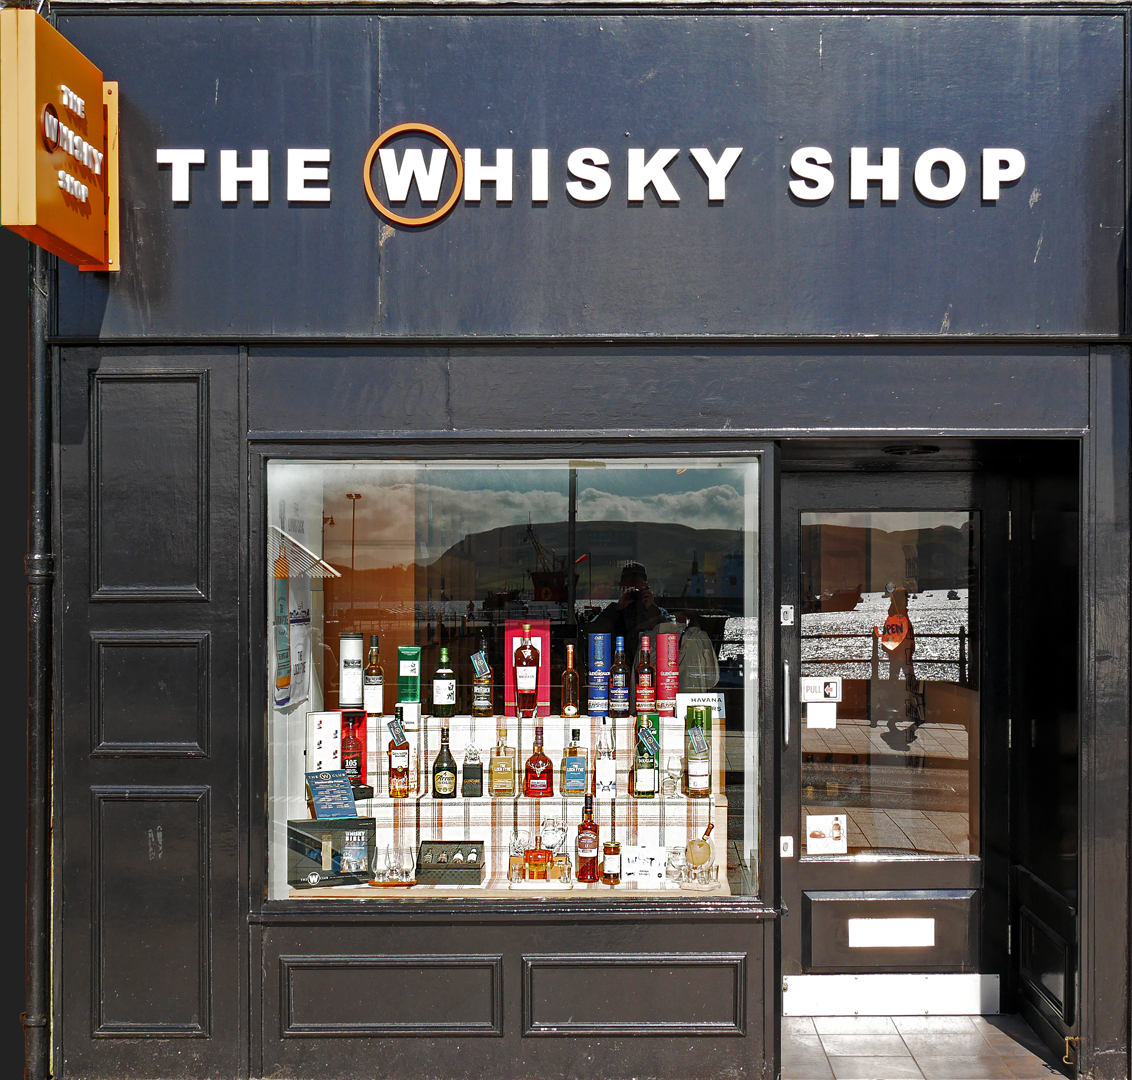 THE WHISKY SHOP